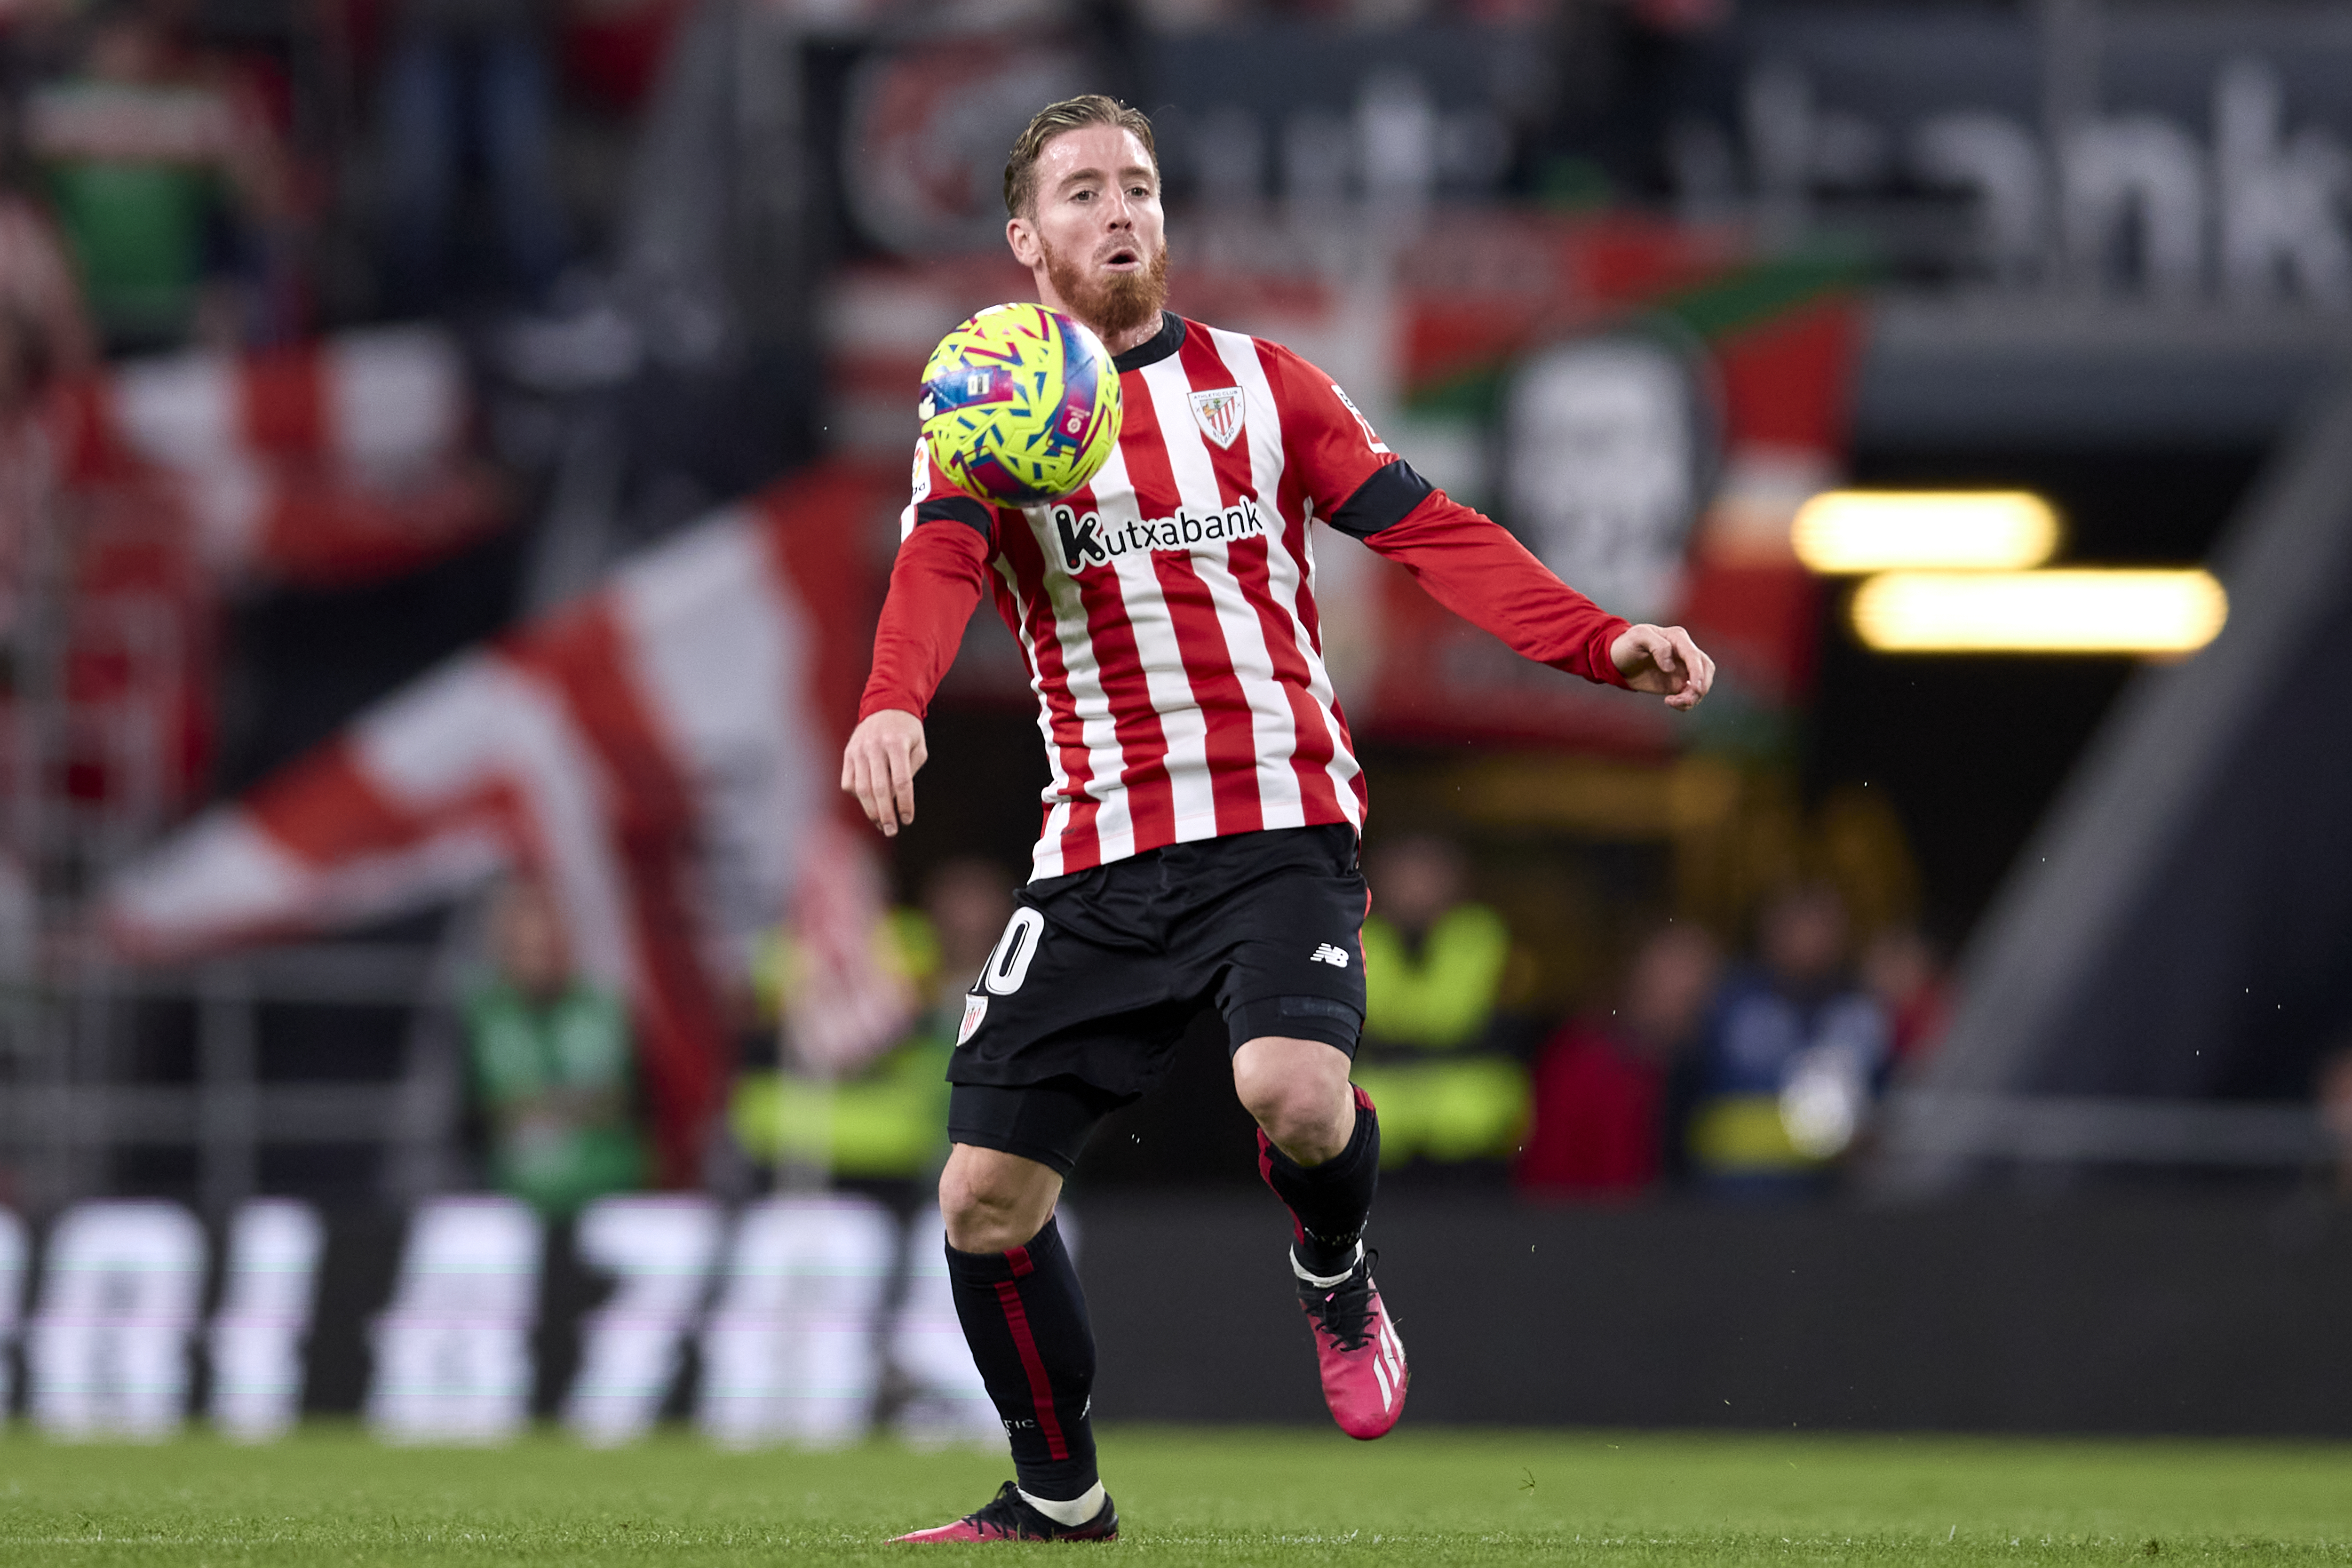 Iker Muniain controls a ball during the Athletic-Barça match.